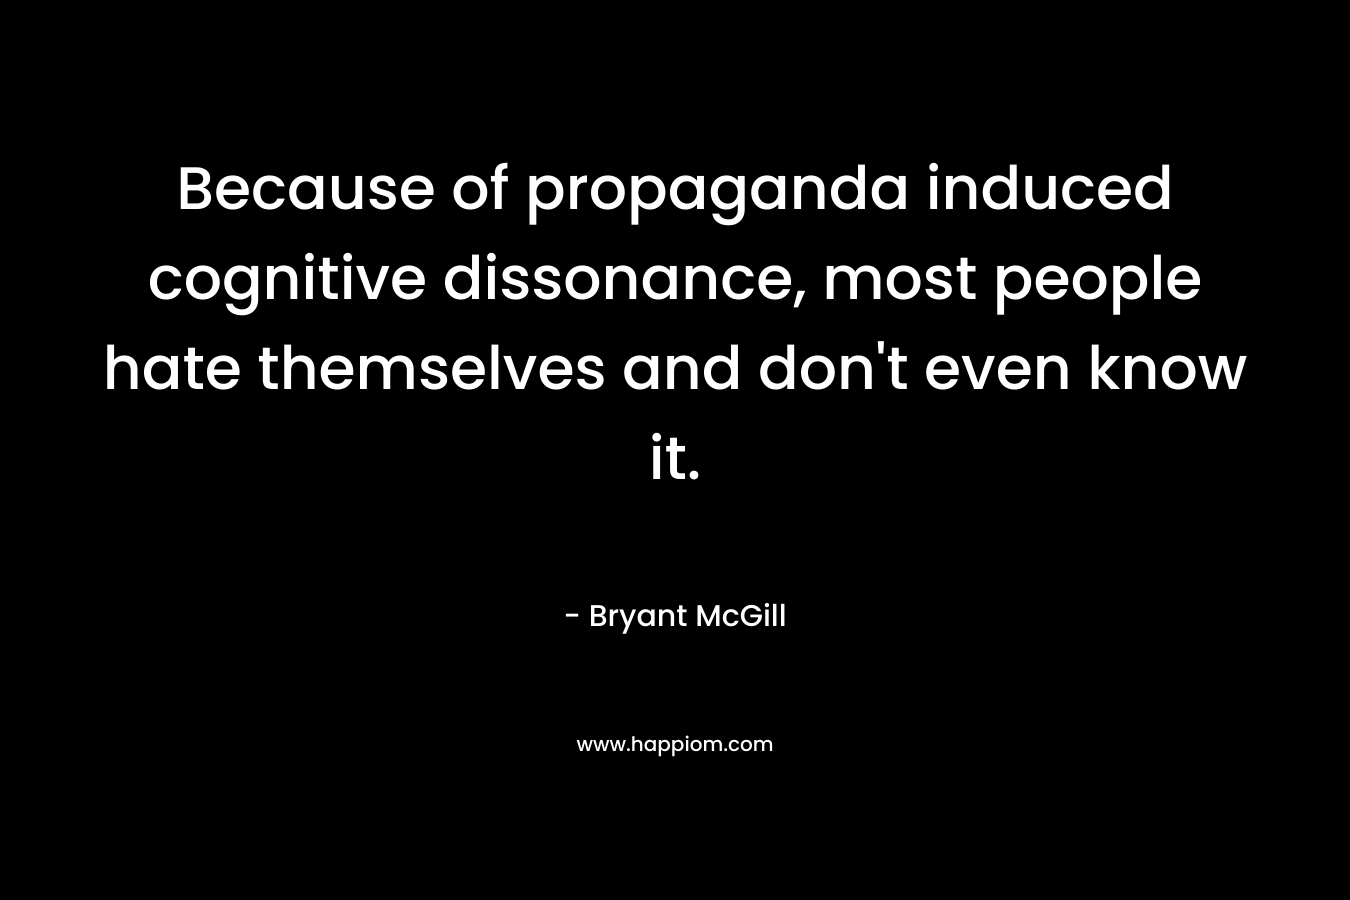 Because of propaganda induced cognitive dissonance, most people hate themselves and don't even know it.